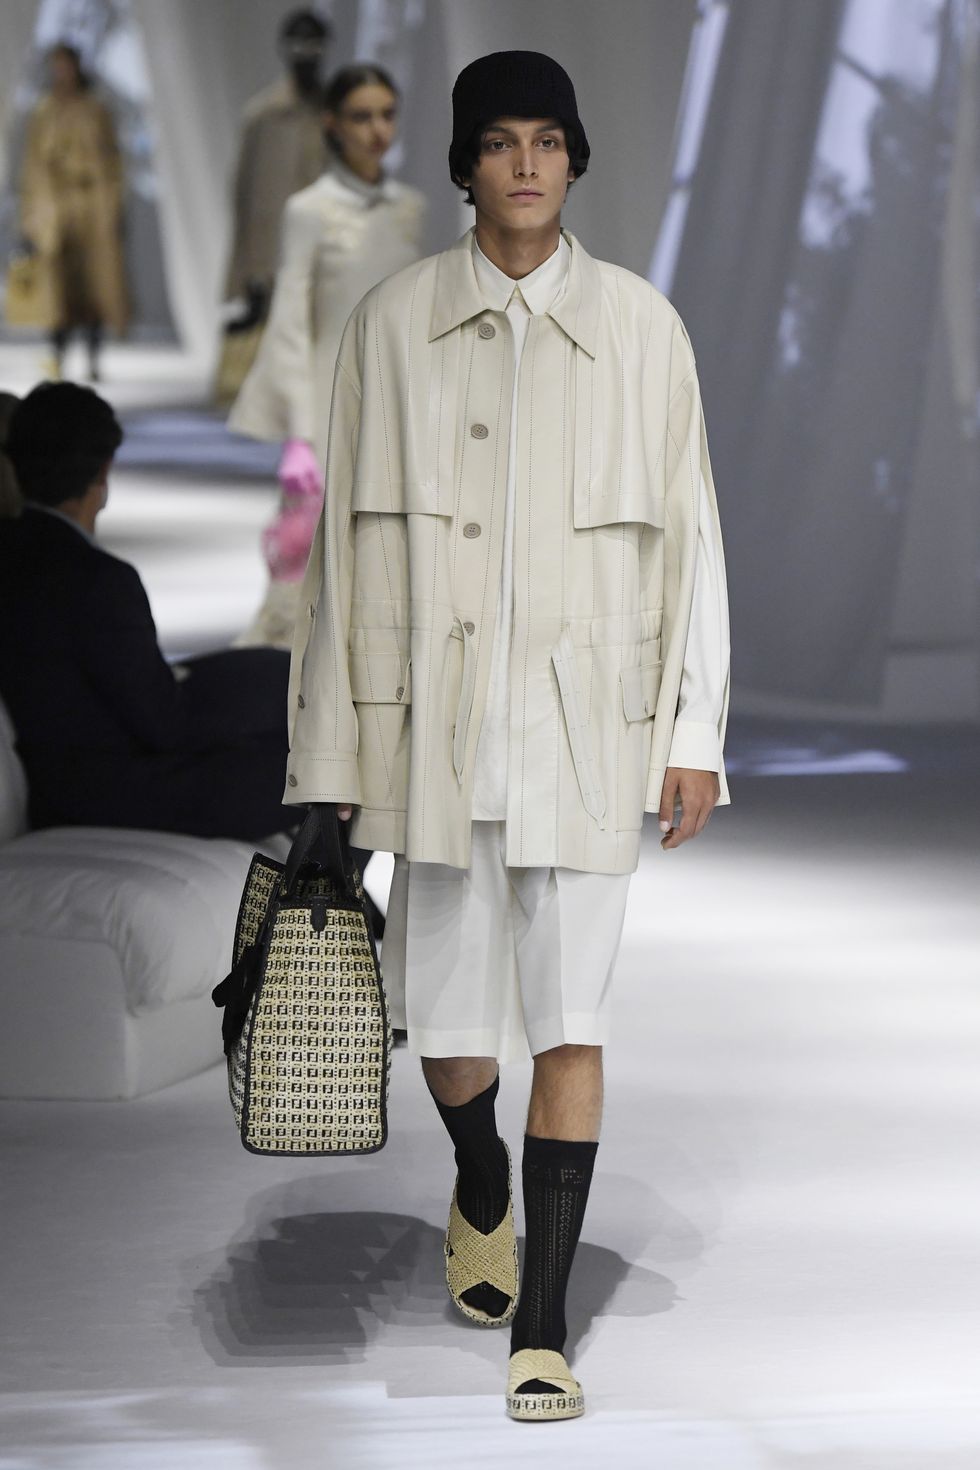 Fendi Spring 2021 Collection Images - Fendi's Runway Show Reflects On ...